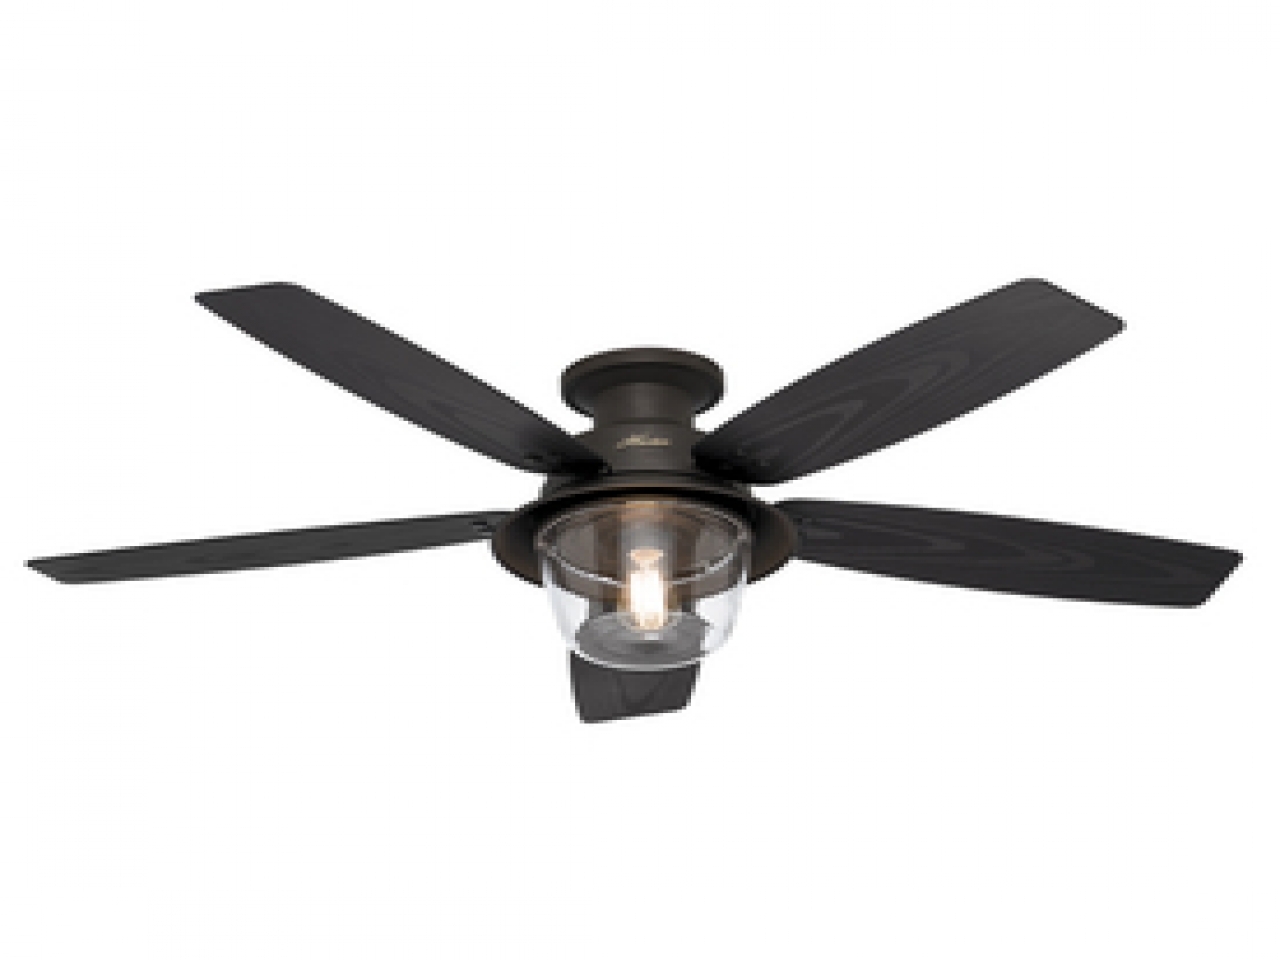 Outdoor Ceiling Fans With Lights Flush Mount1280 X 960